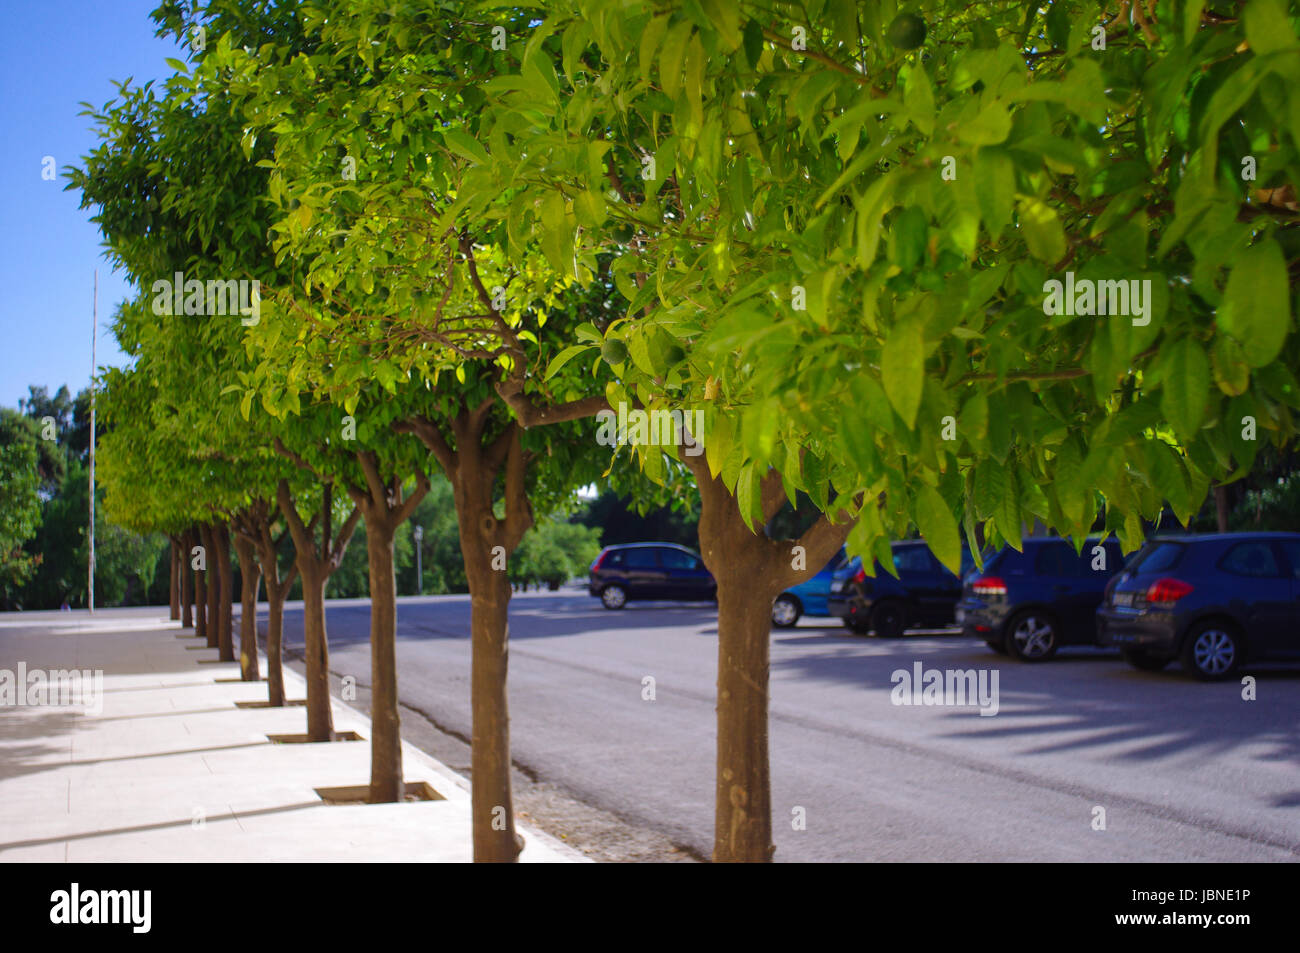 Green Lime trees in Athens, Greece Stock Photo - Alamy